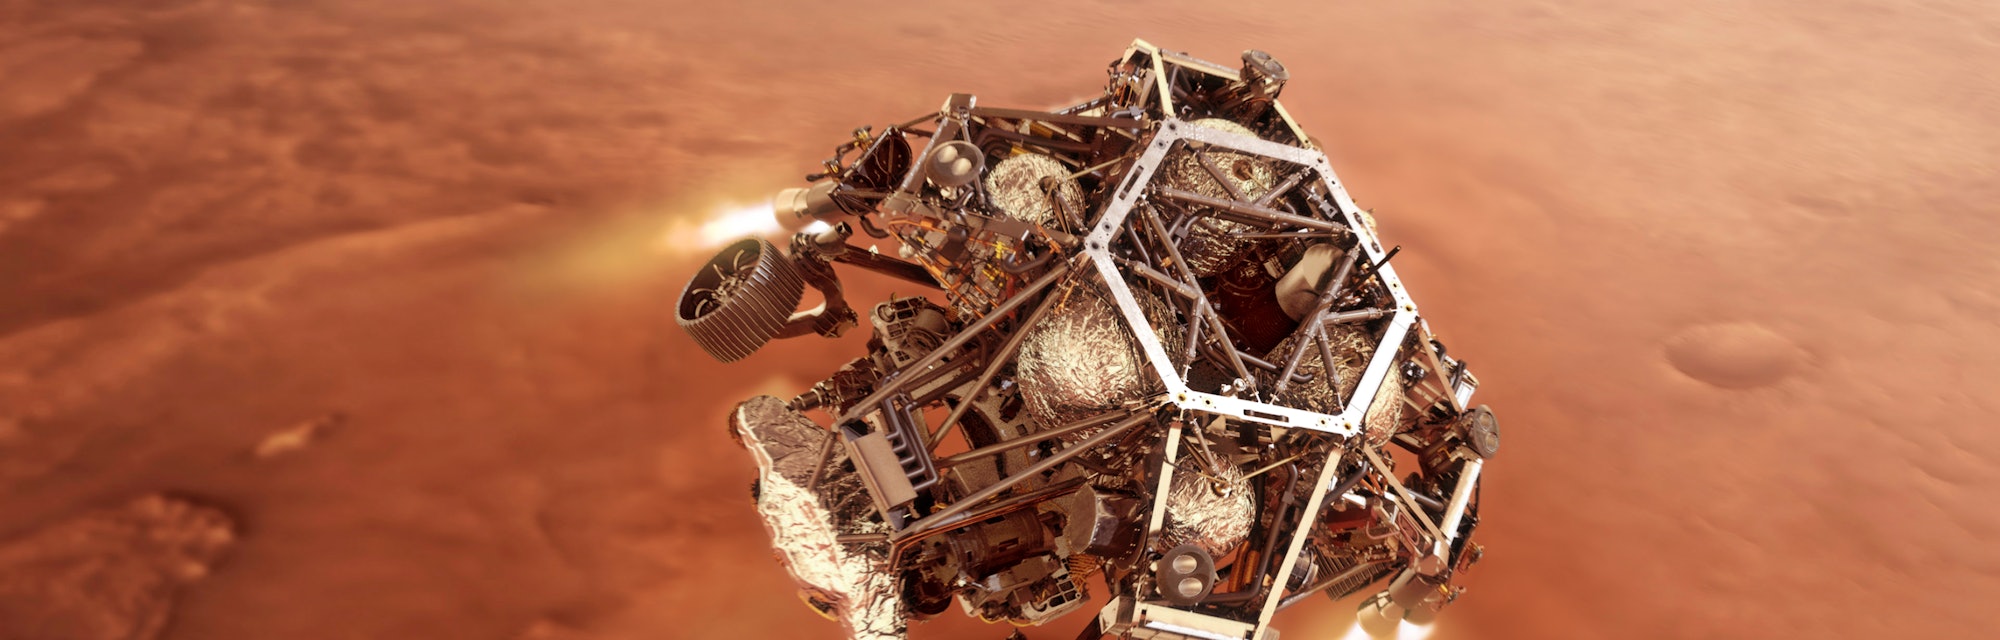 Artist's concept of the Perseverance rover firing up its descent stage engines as it nears the Marti...